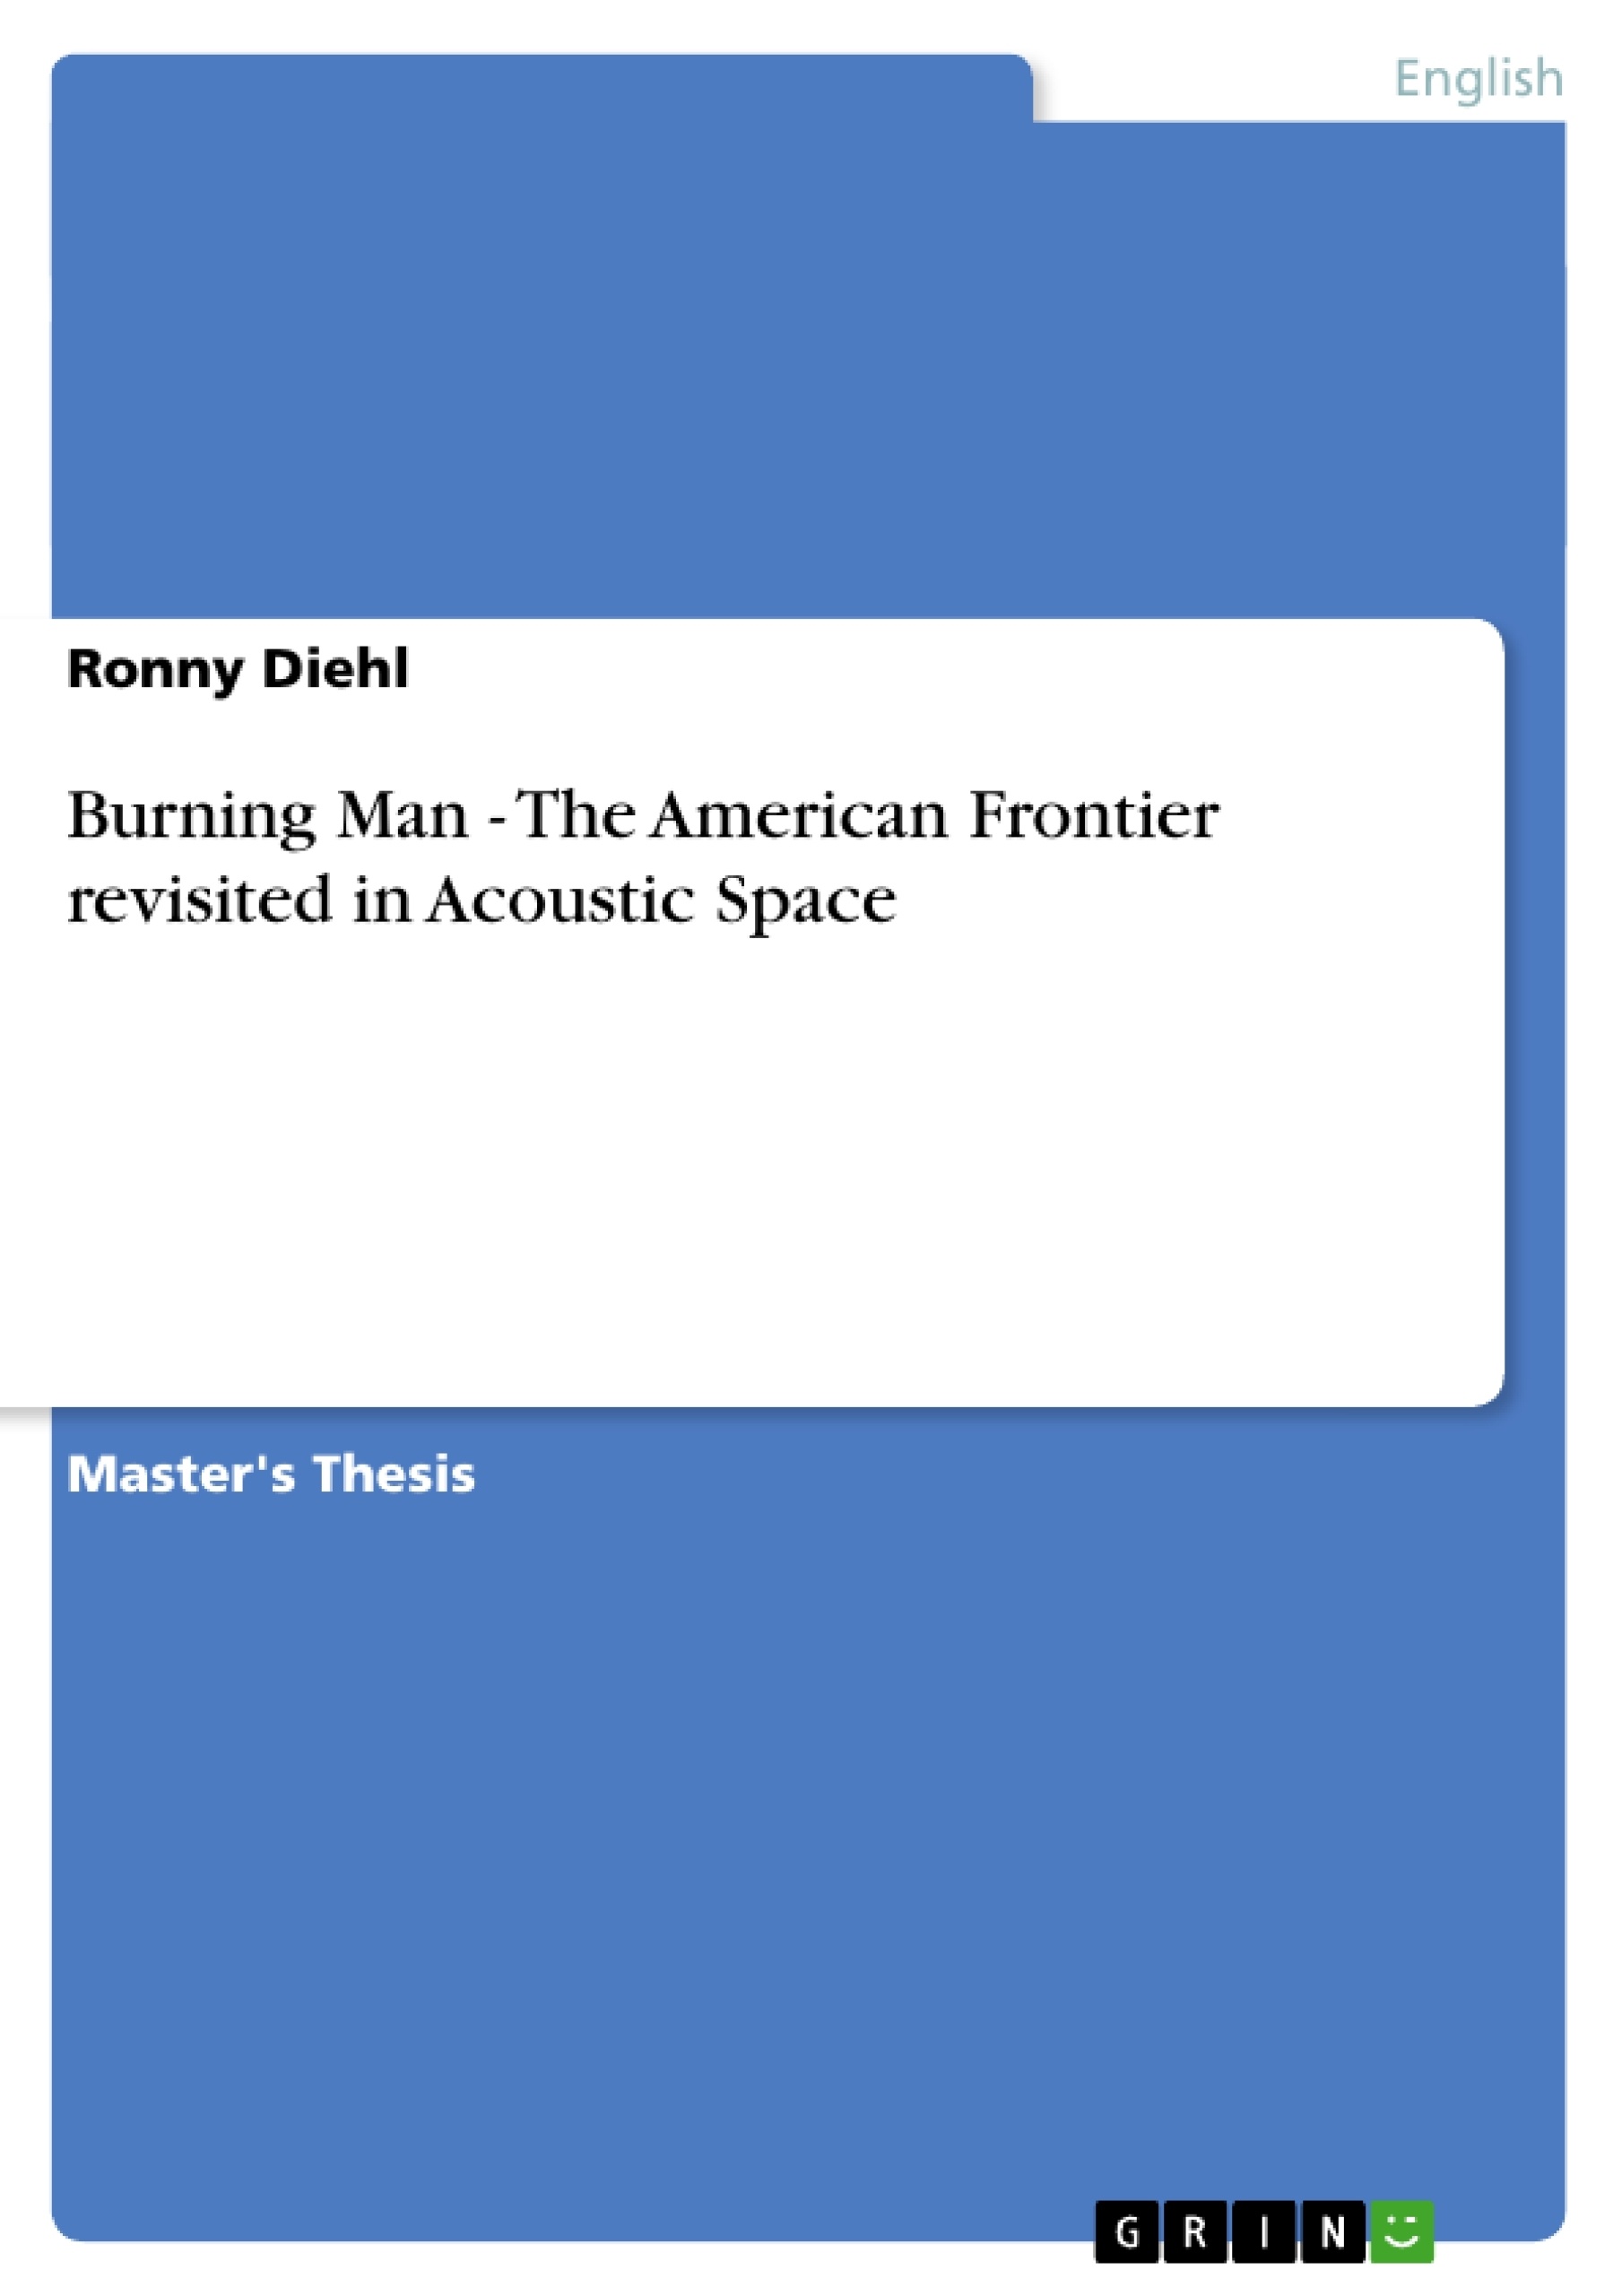 Titel: Burning Man - The American Frontier revisited in Acoustic Space